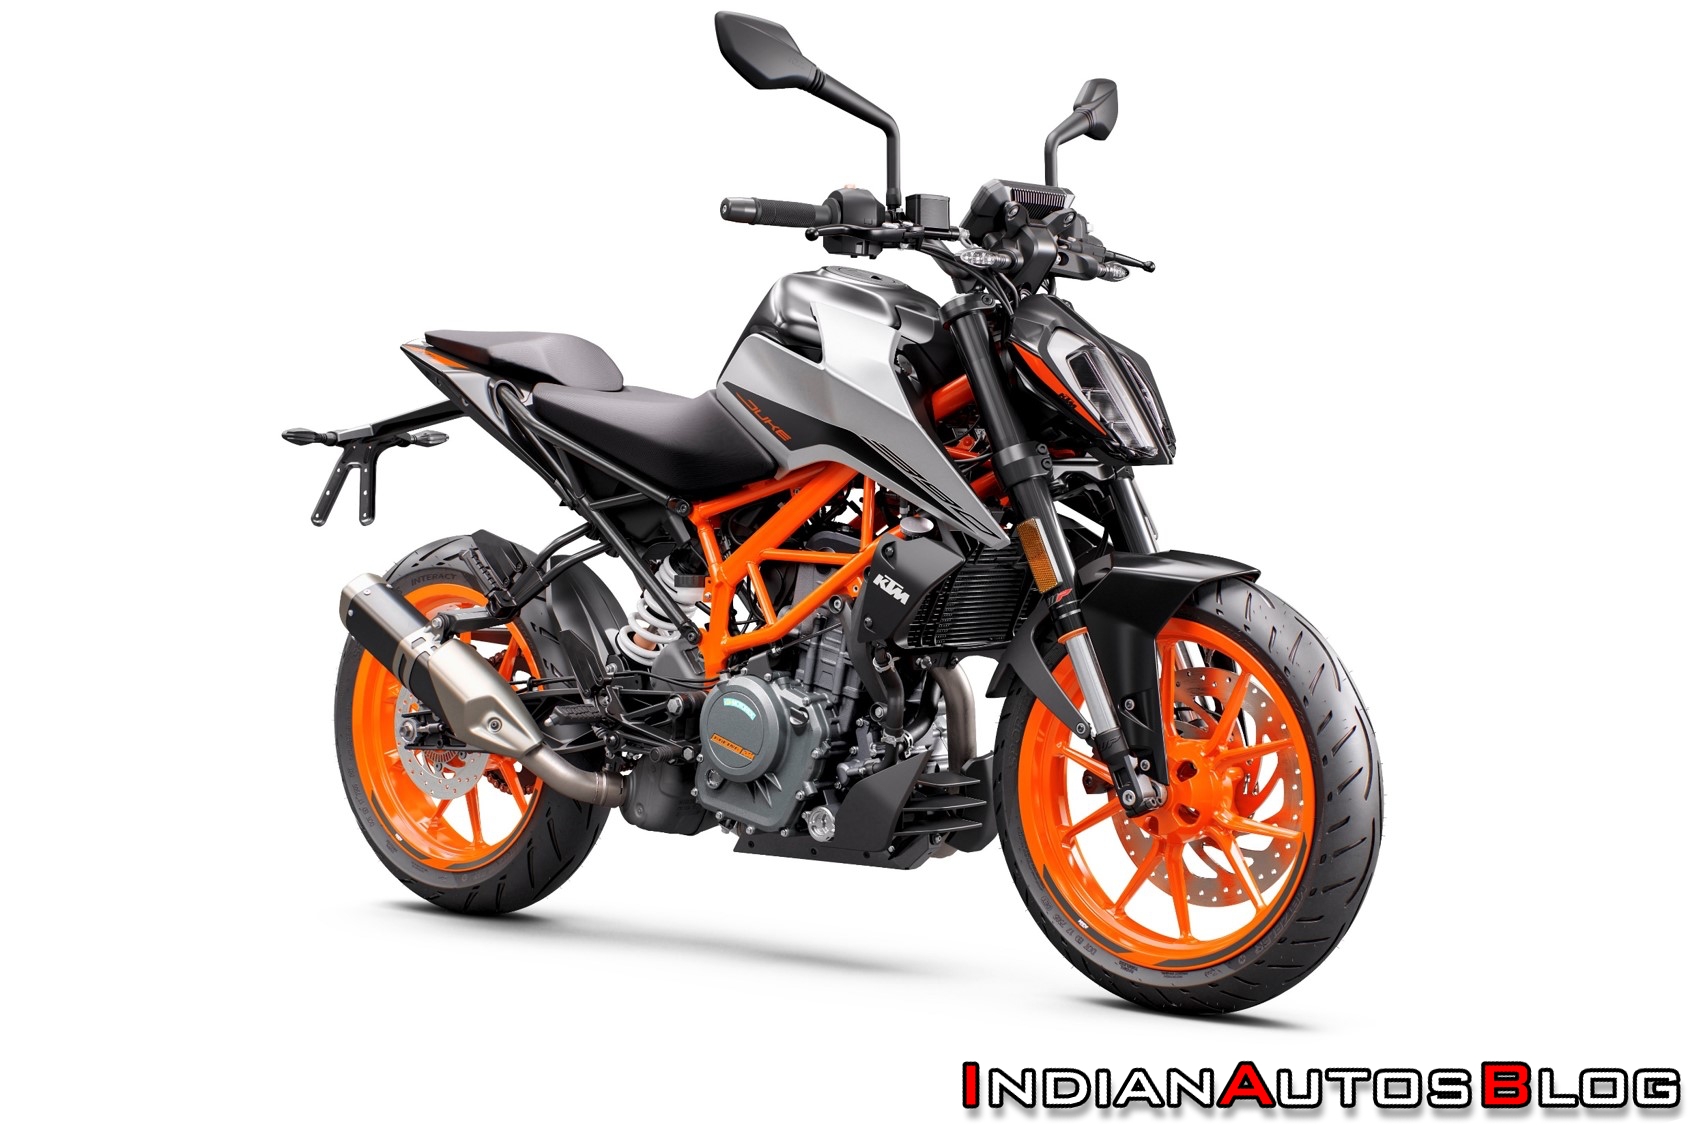 KTM new bikes in India get a price hike of over INR 4,000 - Report